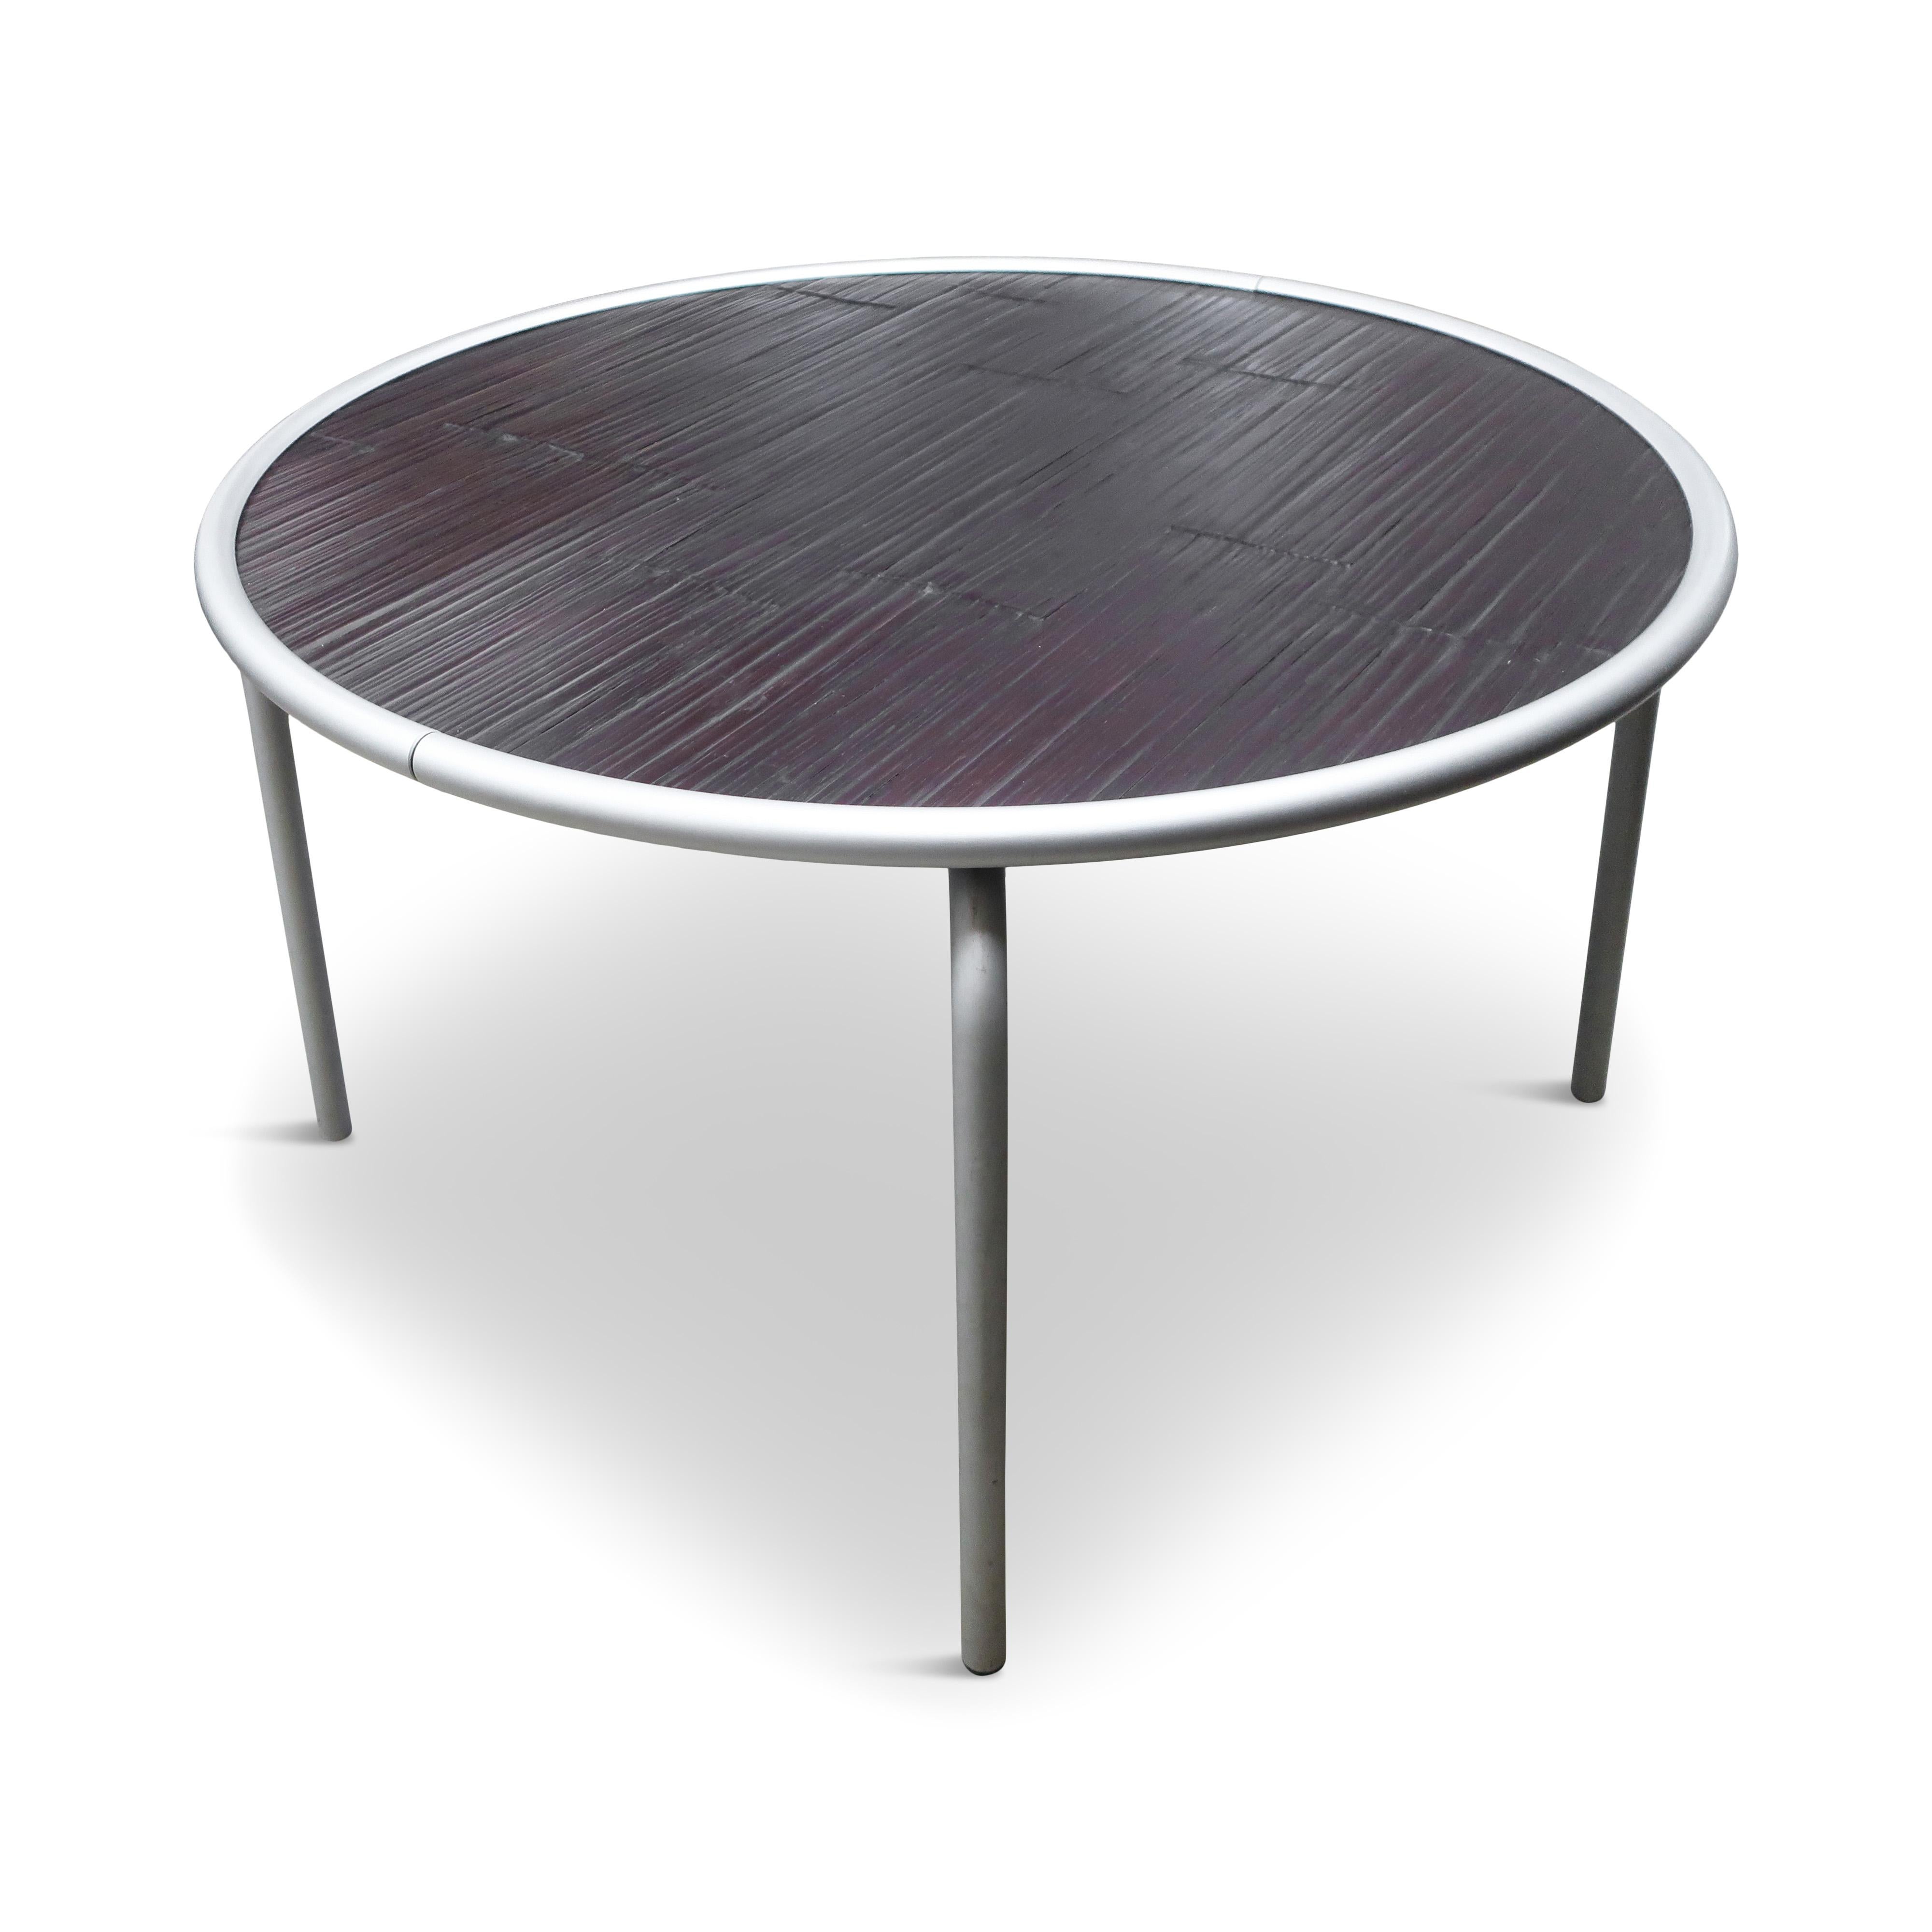 Allu 136 Dining Table by Paola Navone for Gervasoni, '1999' In Good Condition For Sale In Brooklyn, NY